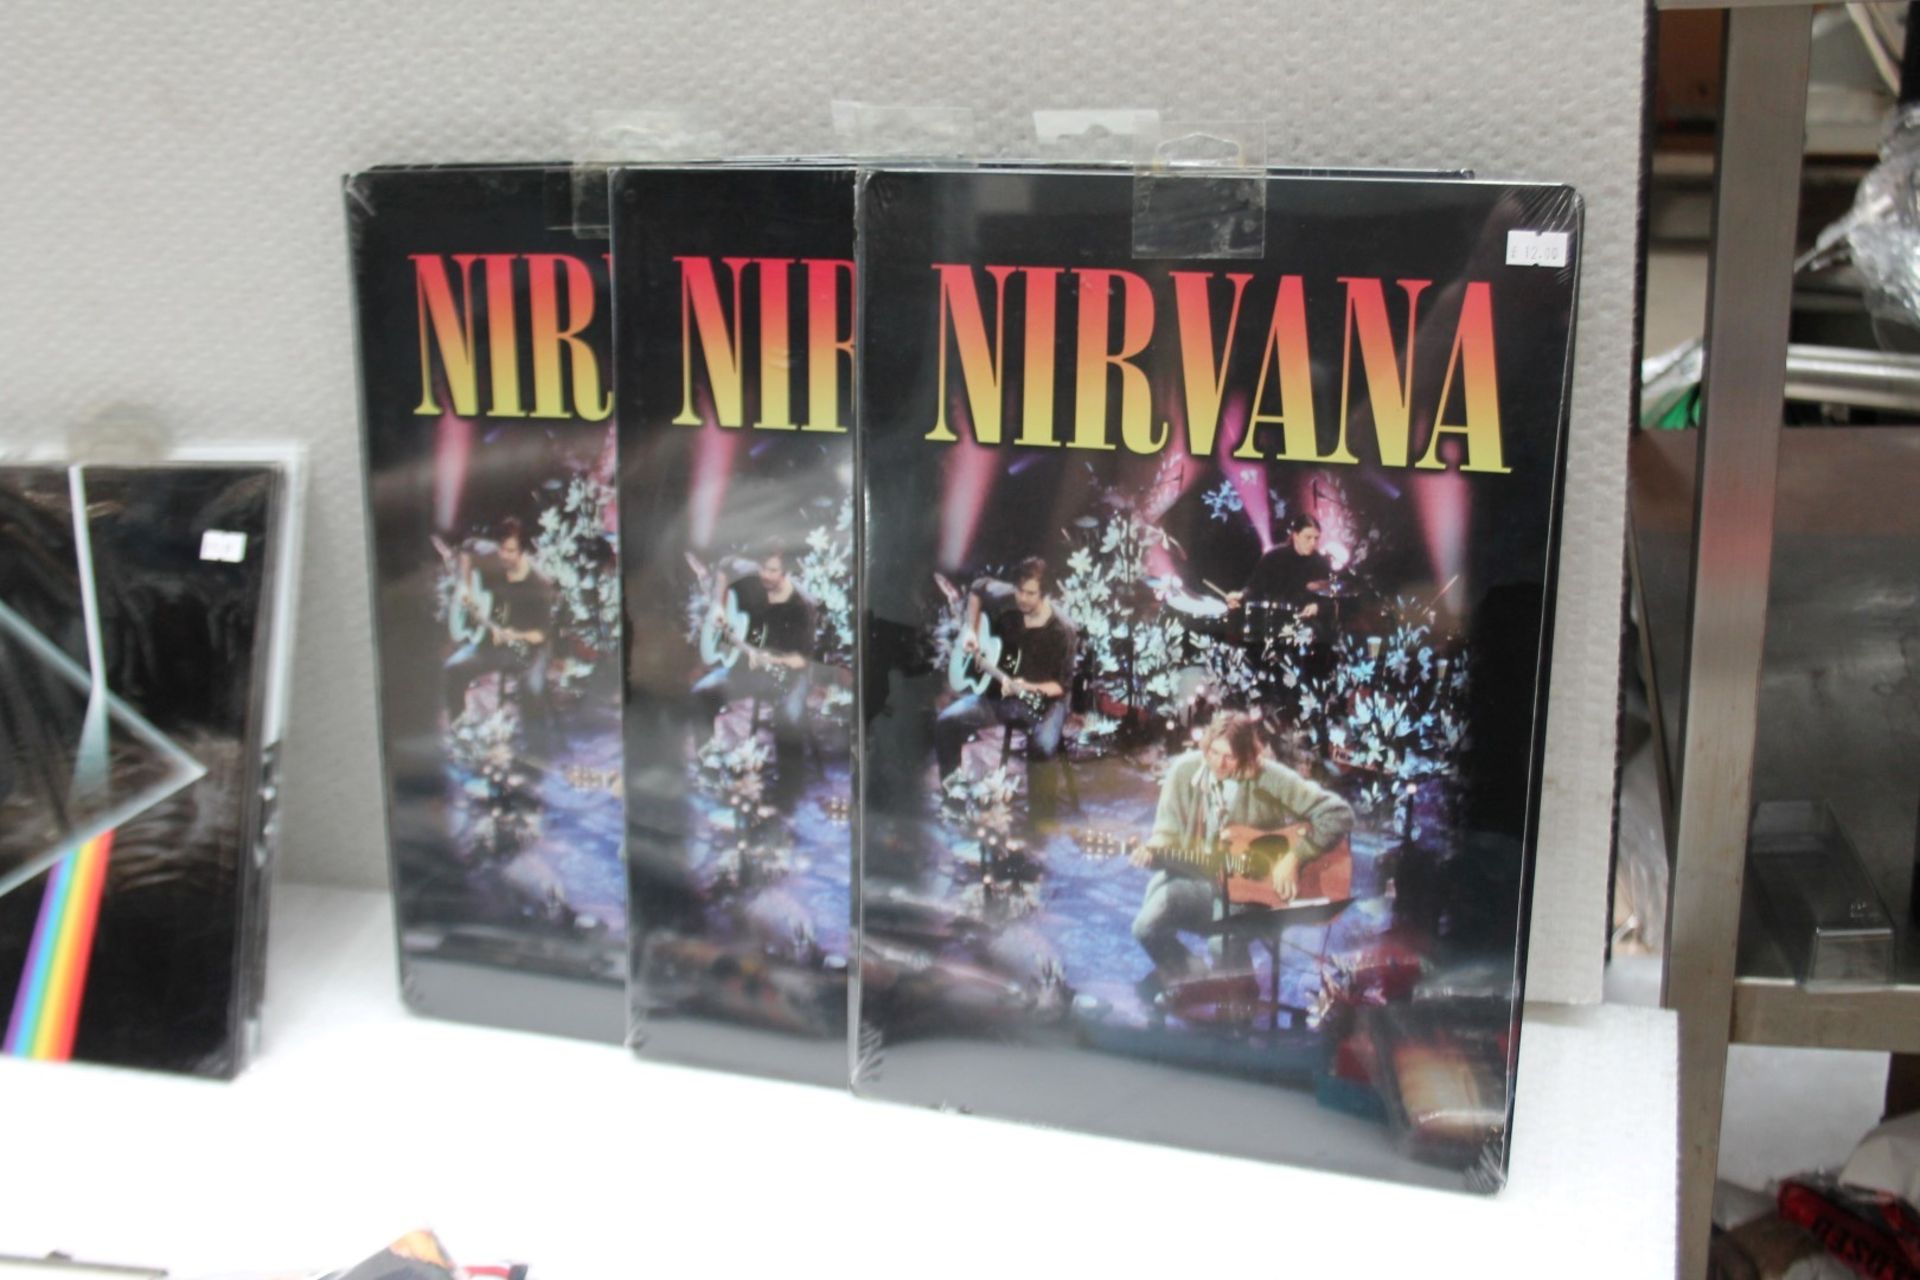 20 x Pieces of Rock n Roll Metal Wall Art - Size: 29x20cm & 40x28cm - Features Nirvana, Elvis, - Image 5 of 12